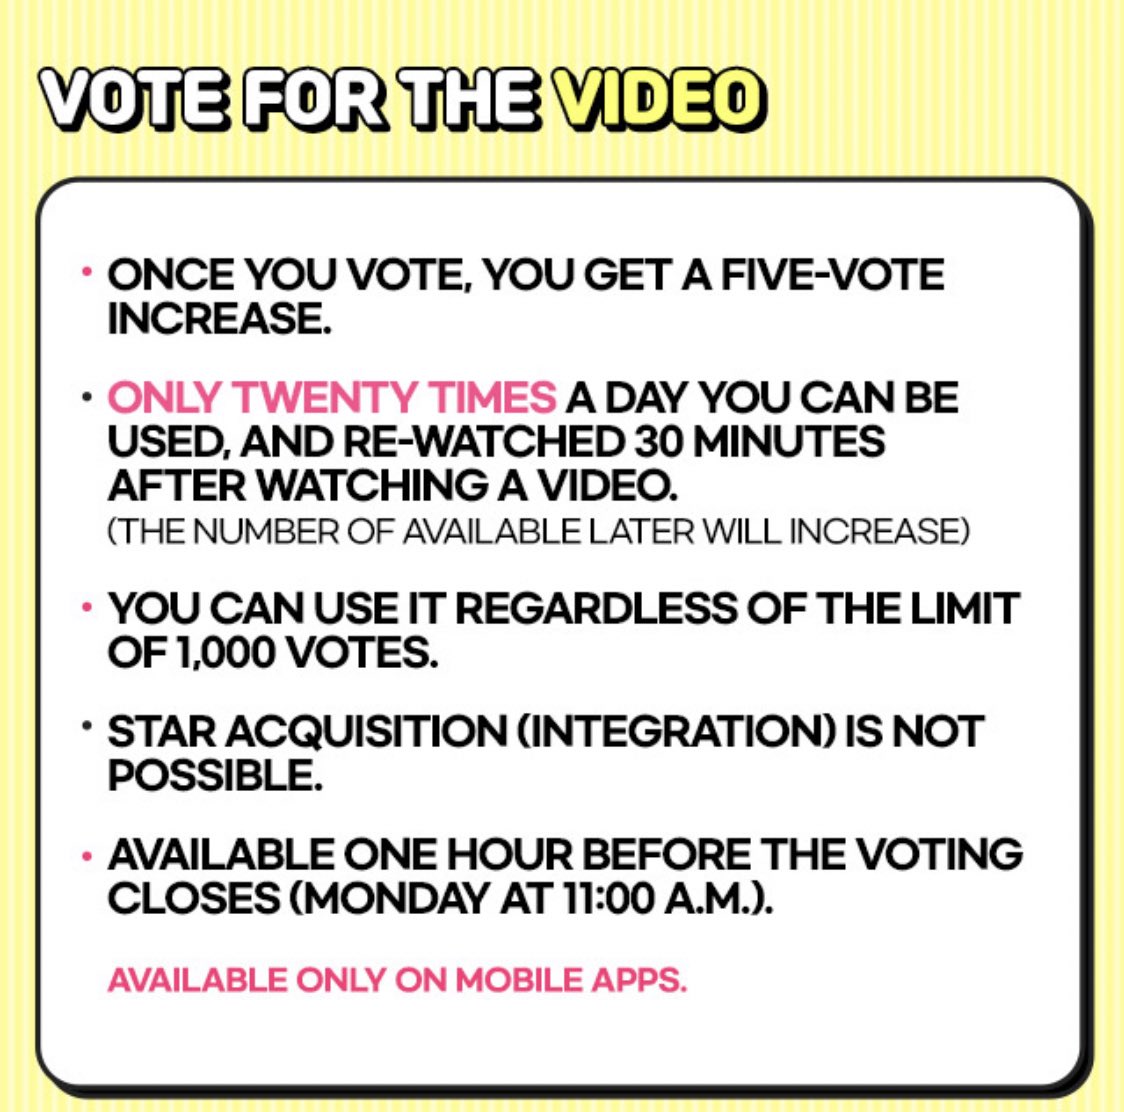 To increase the votes by watching video ads, follow the steps!